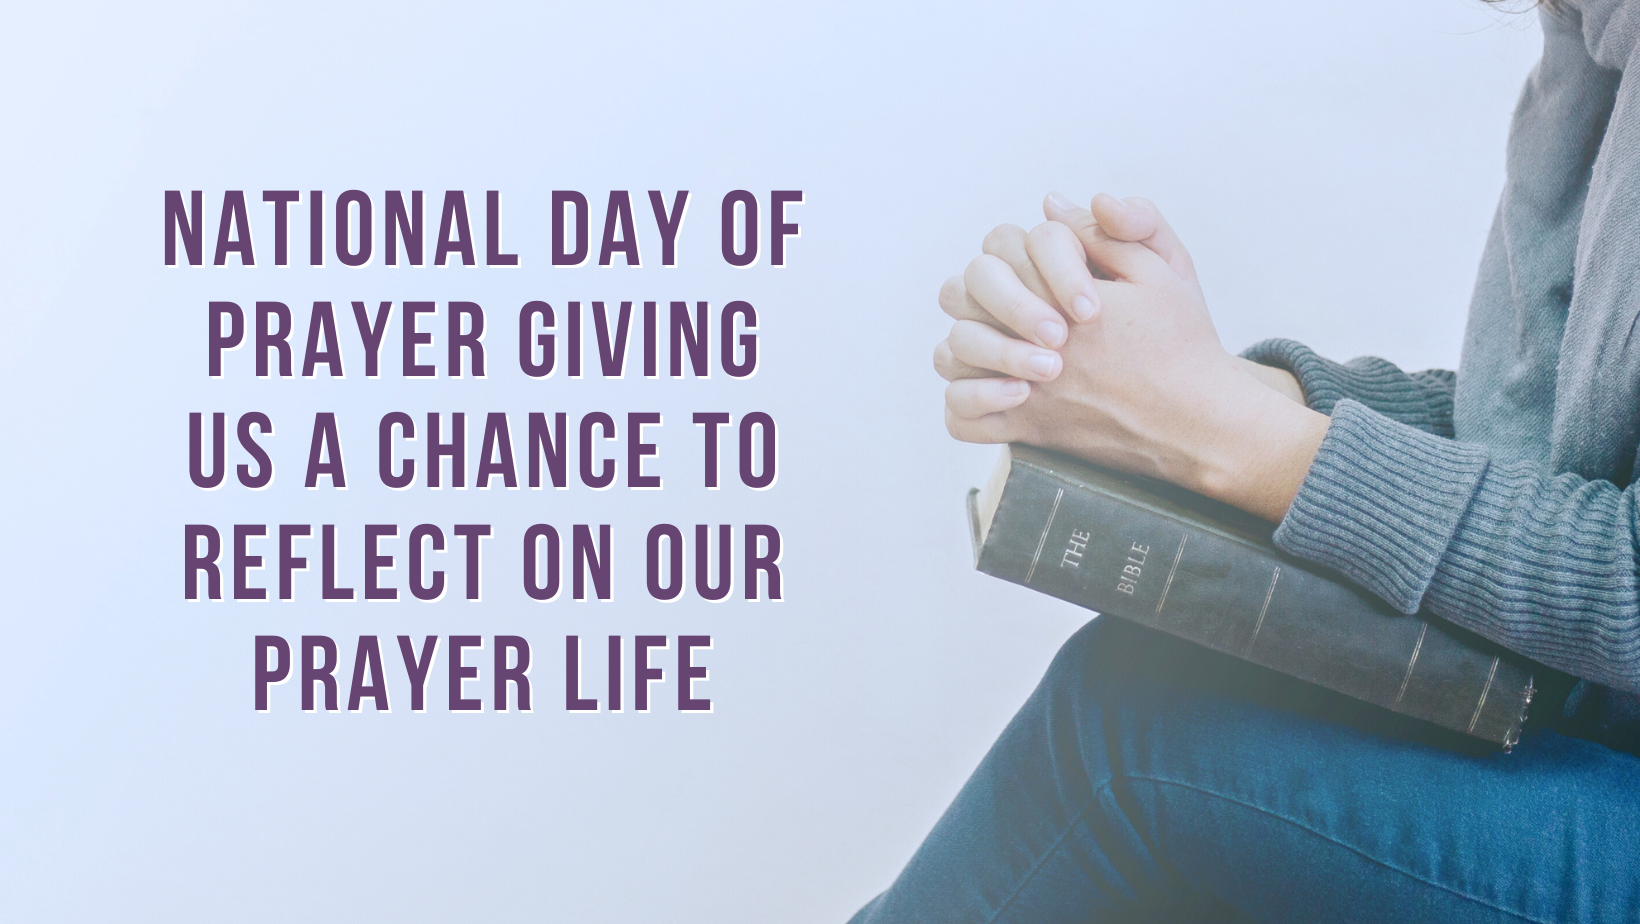 National Day of Prayer giving us a chance to reflect on our prayer life